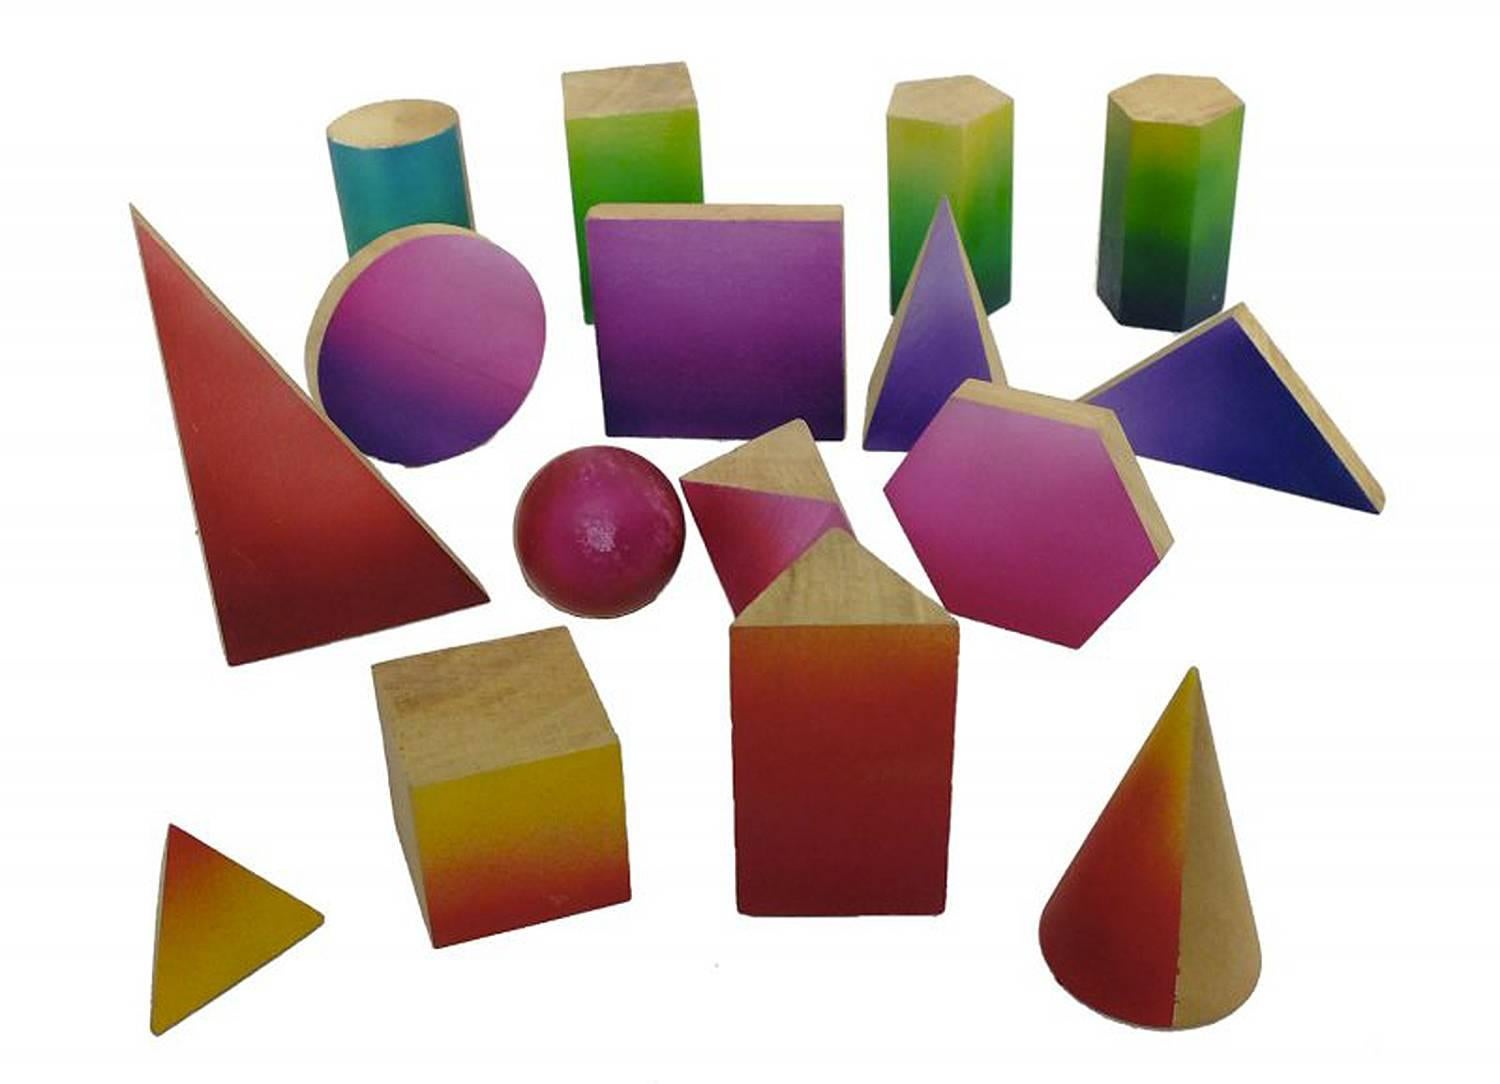 Fruitwood Group of 16 Wooden Geometric Models for Teching